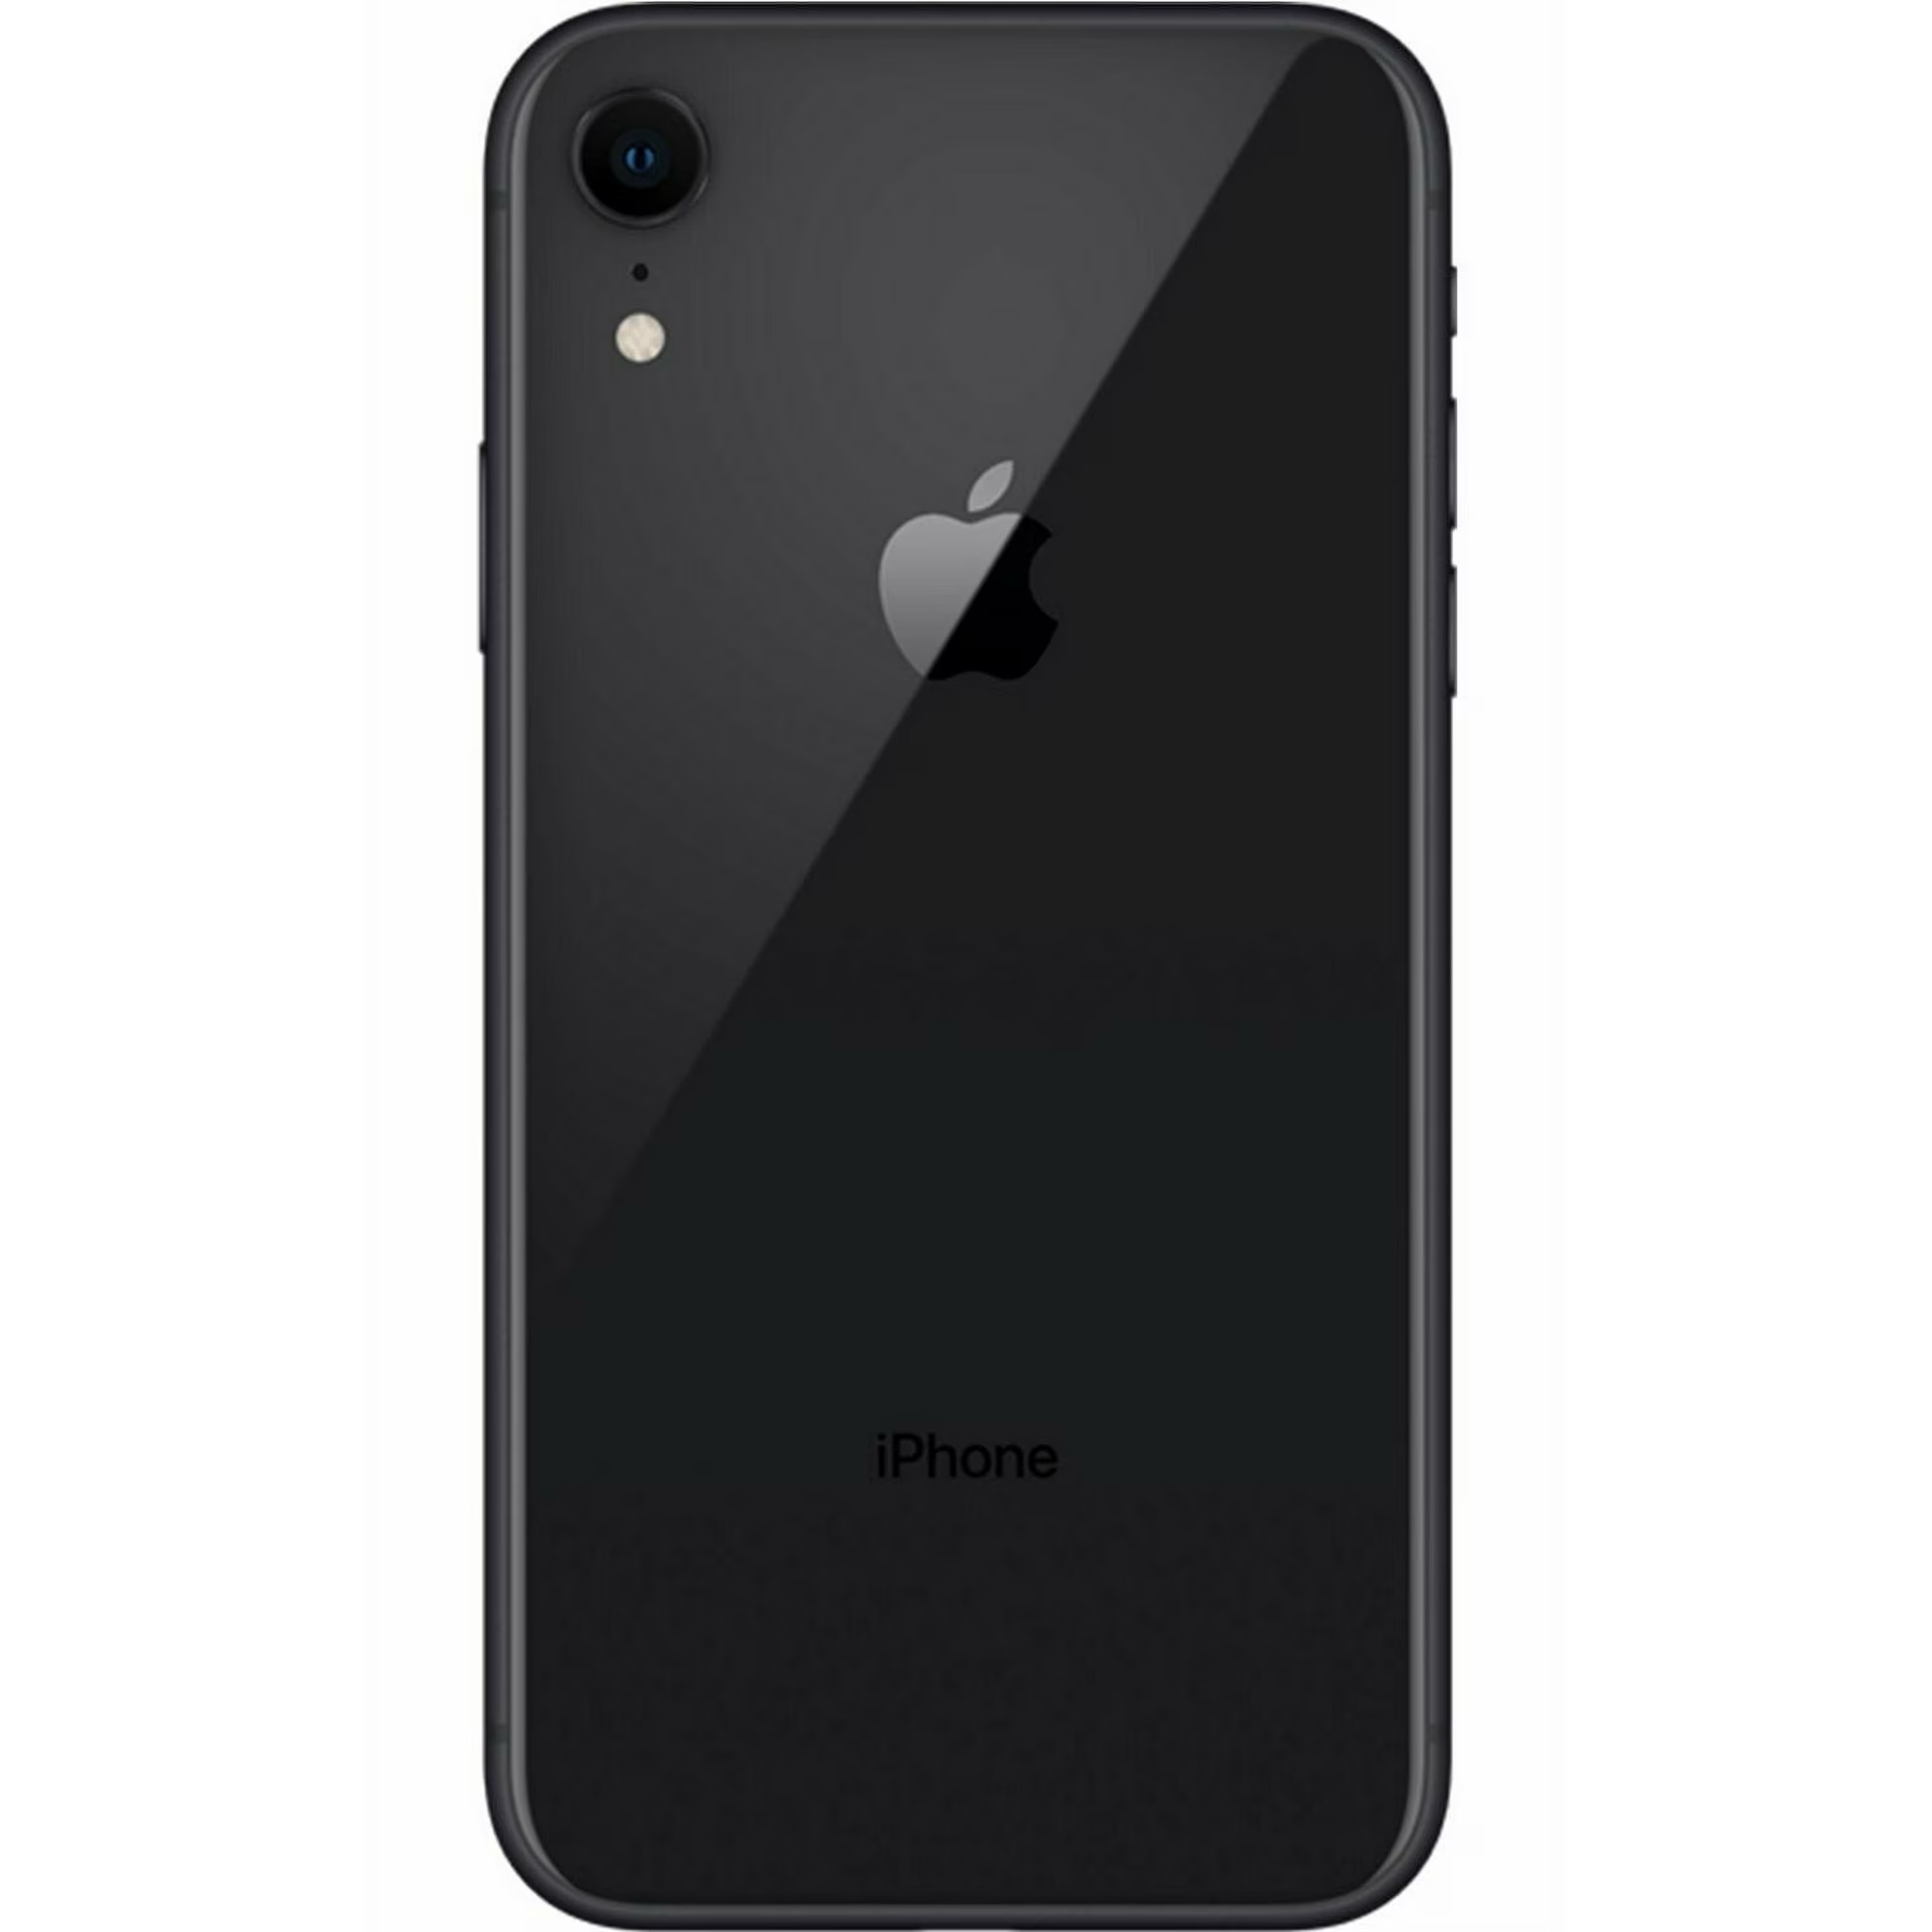 iPhone XR (64gb) - BLACK – Strictly Apple Store